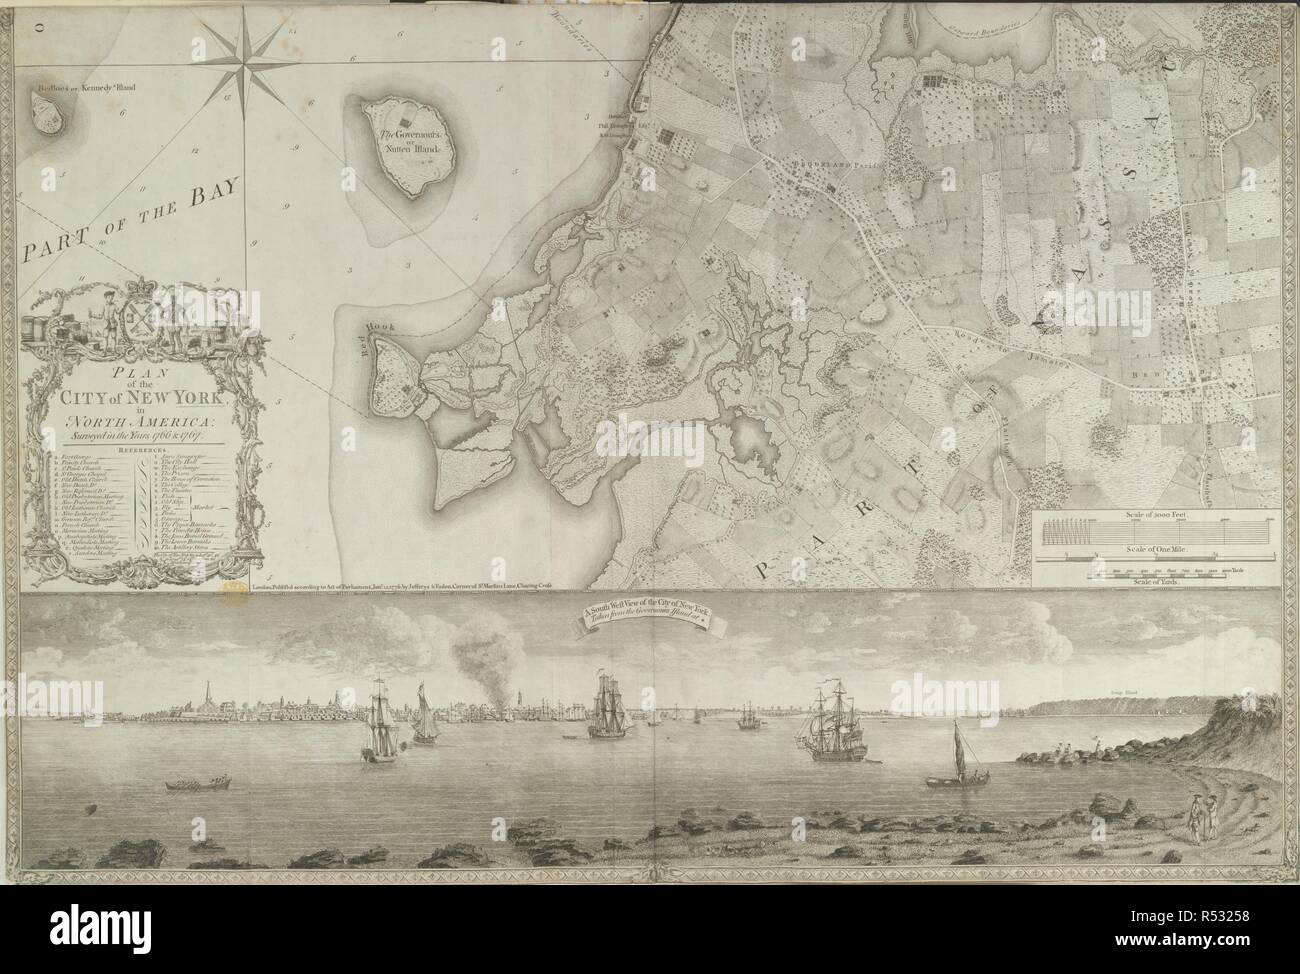 Plan of the City of New York, in North America: surveyed in the years 1766 & 1767... A South West View of the City of New York, taken from the Government Island. . Plan of the City of New York, in North America: surveyed in the years 1766 & 1767. To His Excellency Sir Henry Moore, Bart ... This Plan of the City of New York and its environs, survey'd and laid down. Is ... dedicated, by ... B. Ratzer ... Thos. Kitchin sculpt., etc. Scale of one mile[ = 16 2/5 mm.]. A South West View of the City of New York, taken from the Government Island. London : Jefferys & Faden, Jany. 12, 1776. 2 Sh. 894 x  Stock Photo